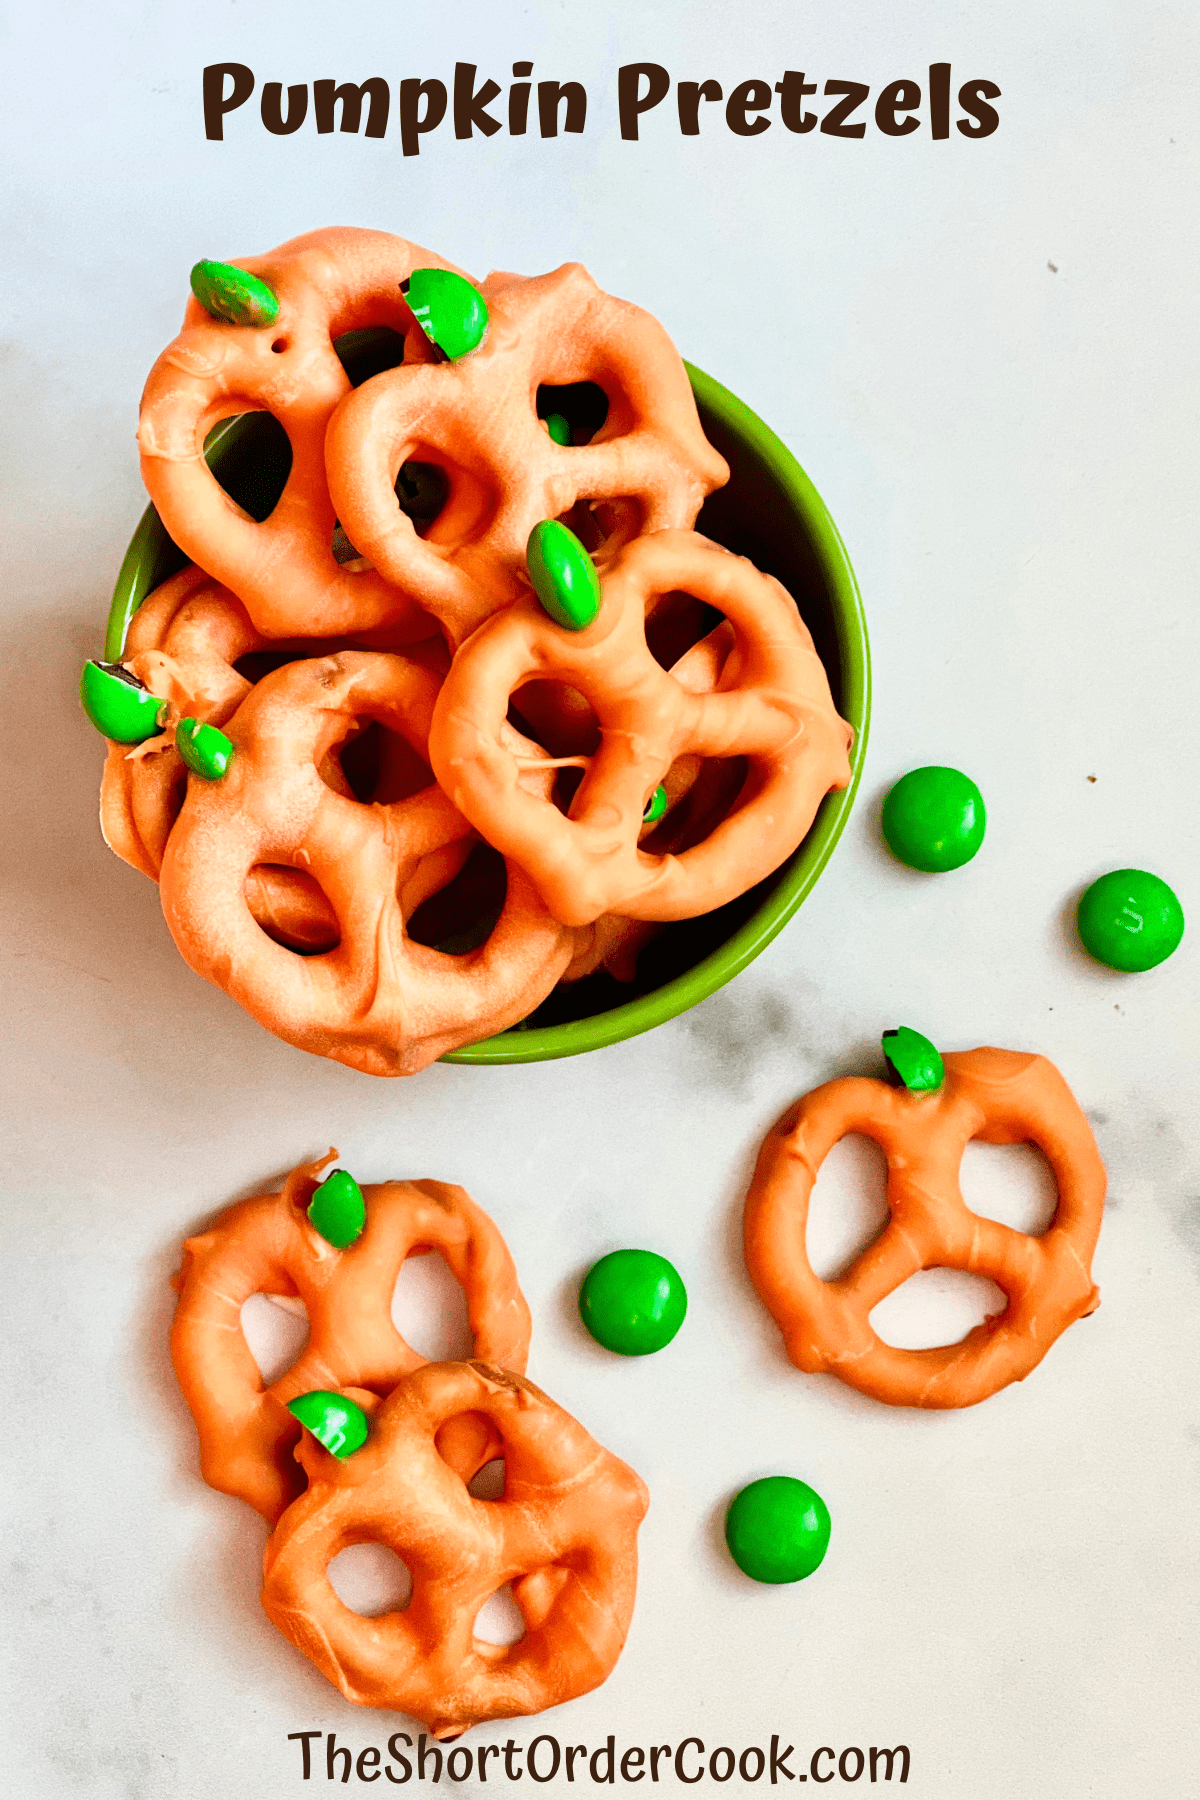 A bowl of pretzels with orange candy coating that are pumpkin-shaped in a bowl and on a table.